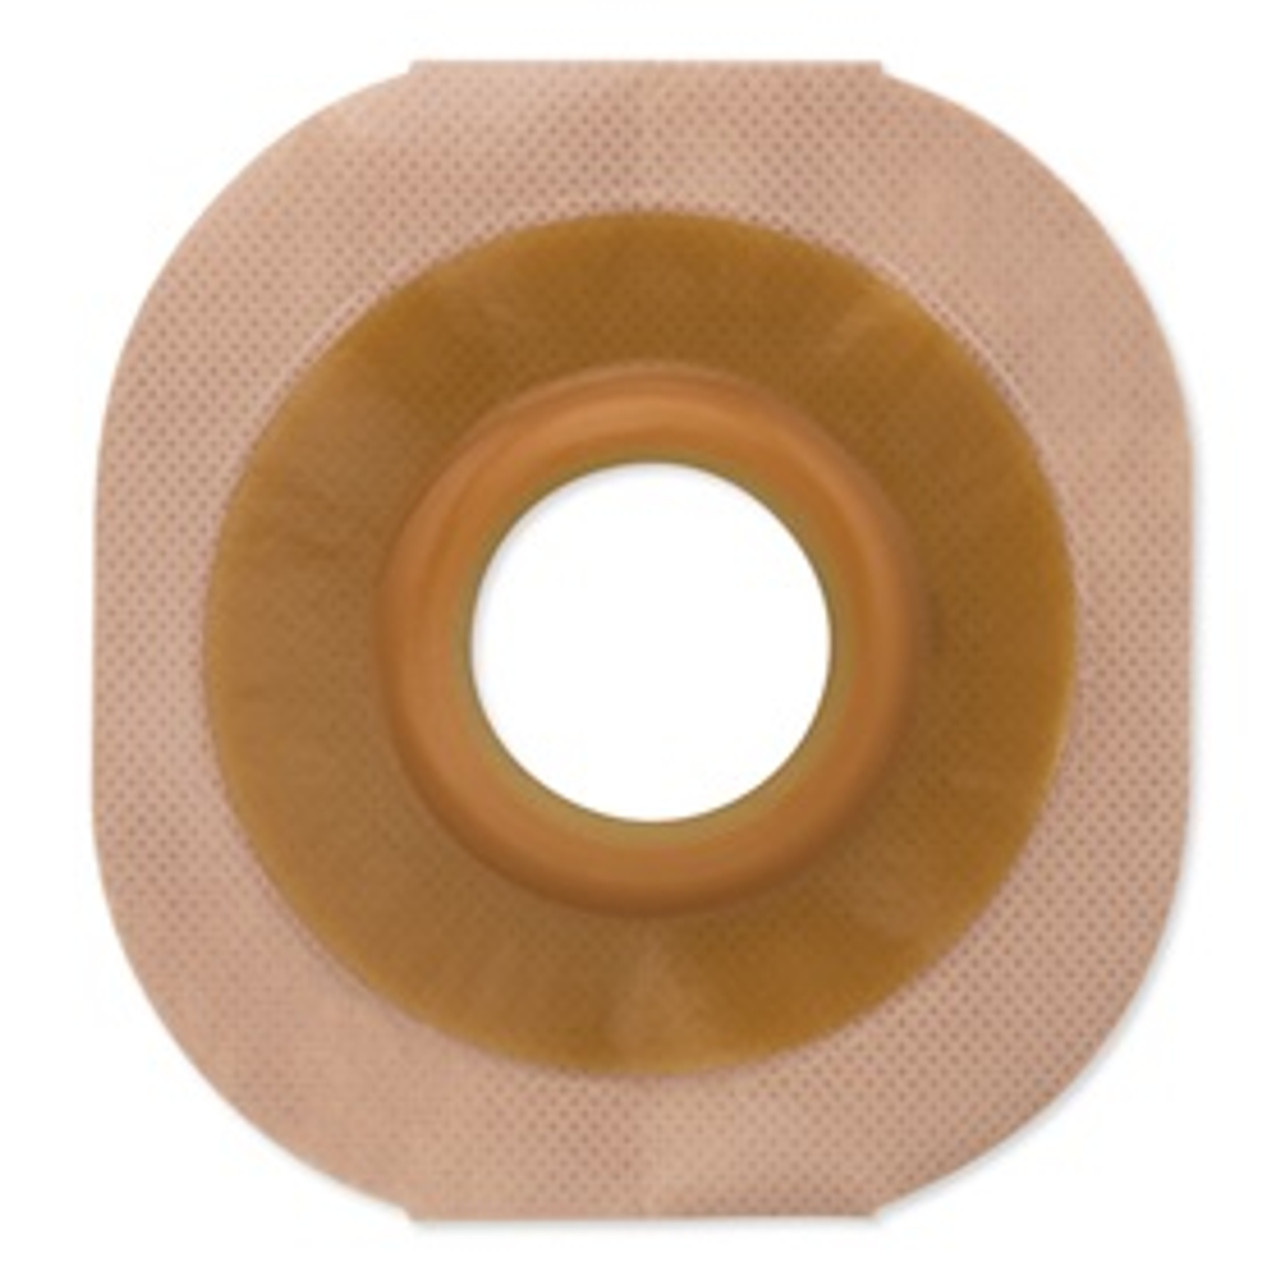 Hollister 13904 BX/5 NEW IMAGE FLEXTEND CONVEX SKIN Barrier WITH TAPERED BORDER, 1 3/4" (44MM) FLANGE, PRE-CUT 1" (25MM)